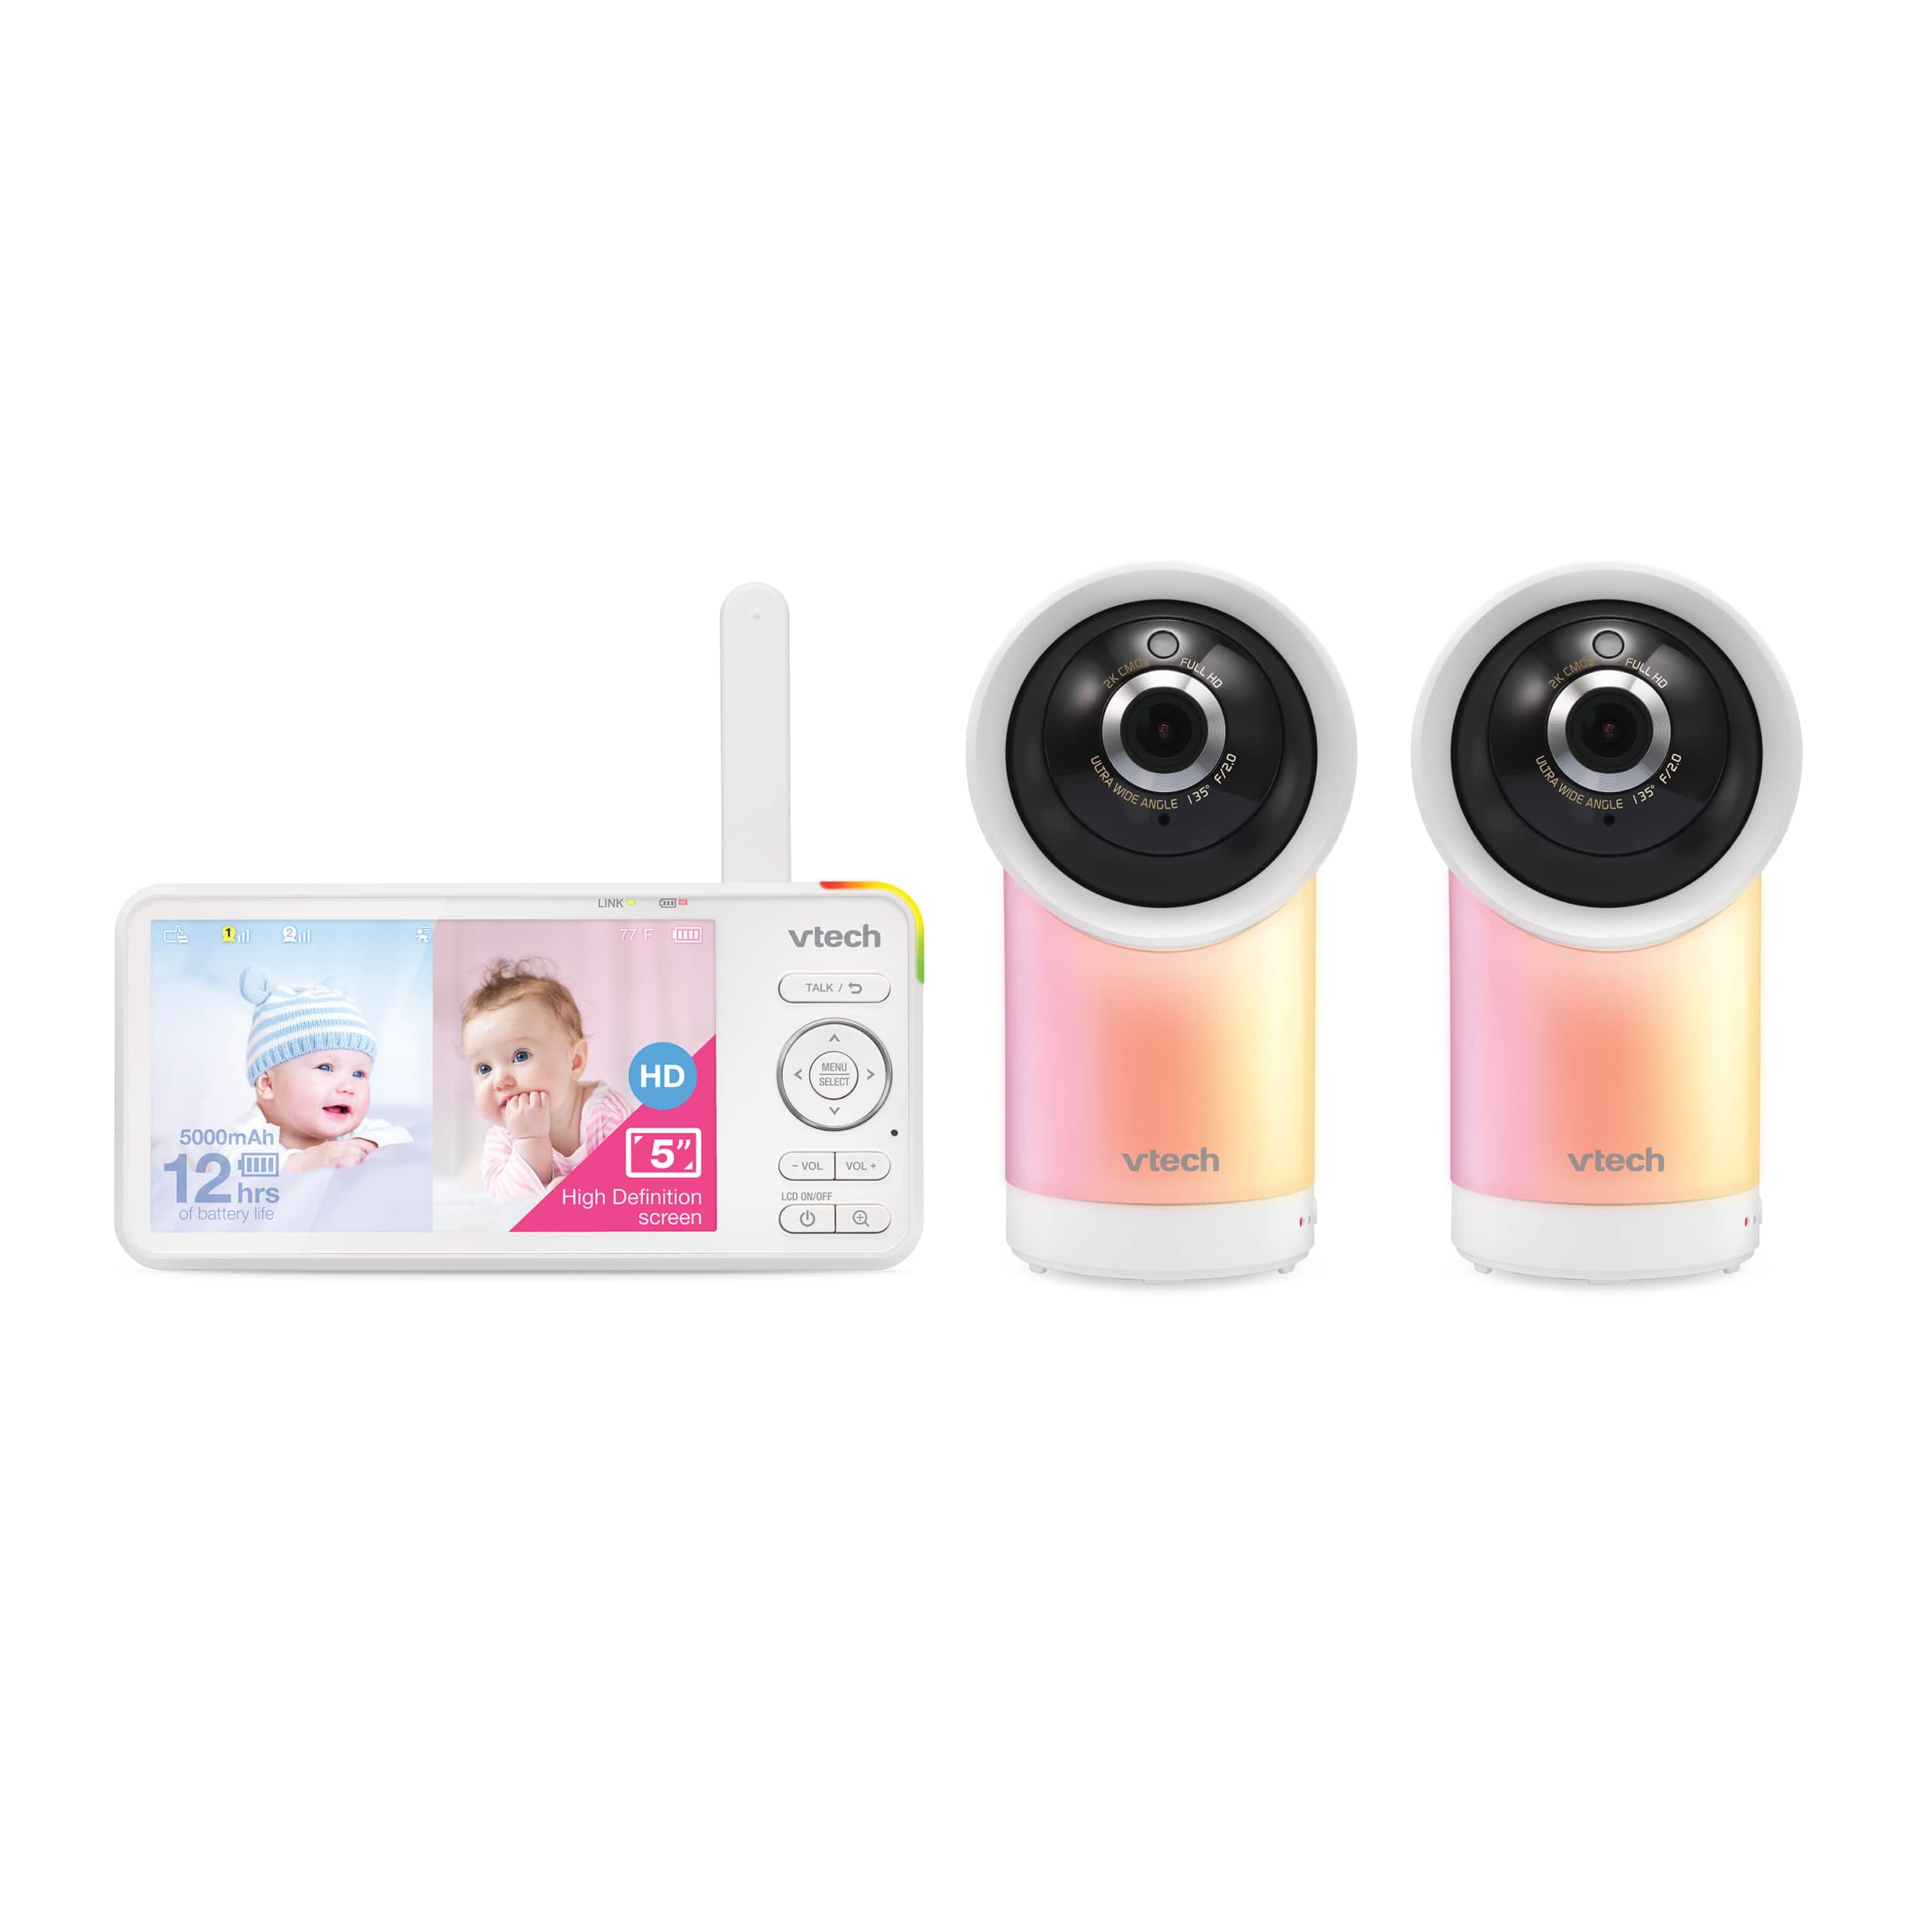 2 Camera 1080p Smart WiFi Remote Access 360 Degree Pan & Tilt Video Baby Monitor with 5" High Definition 720p Display, Night Light - view 1